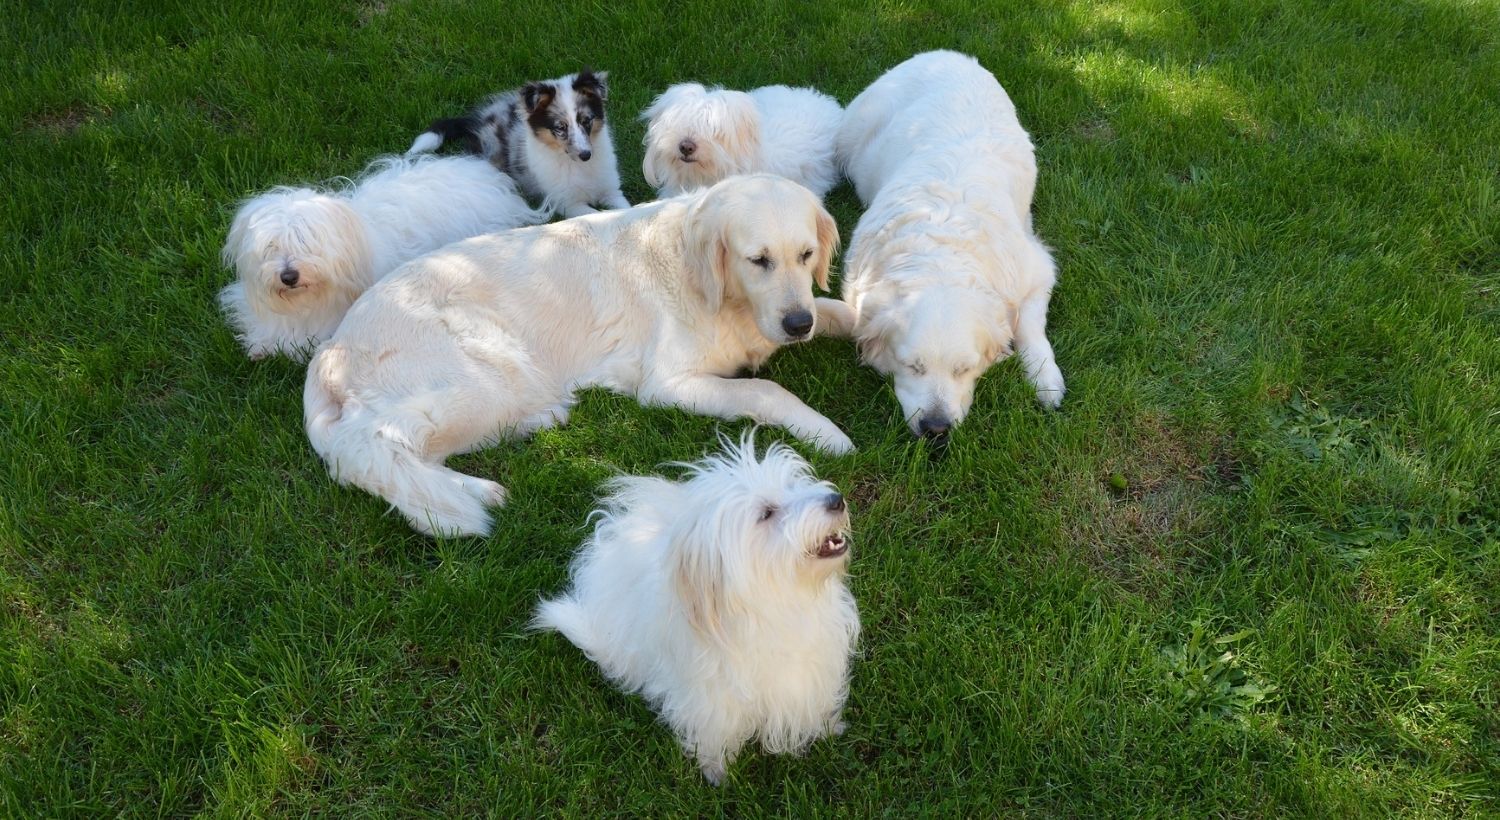 Six dogs sitting and laying in the open grass